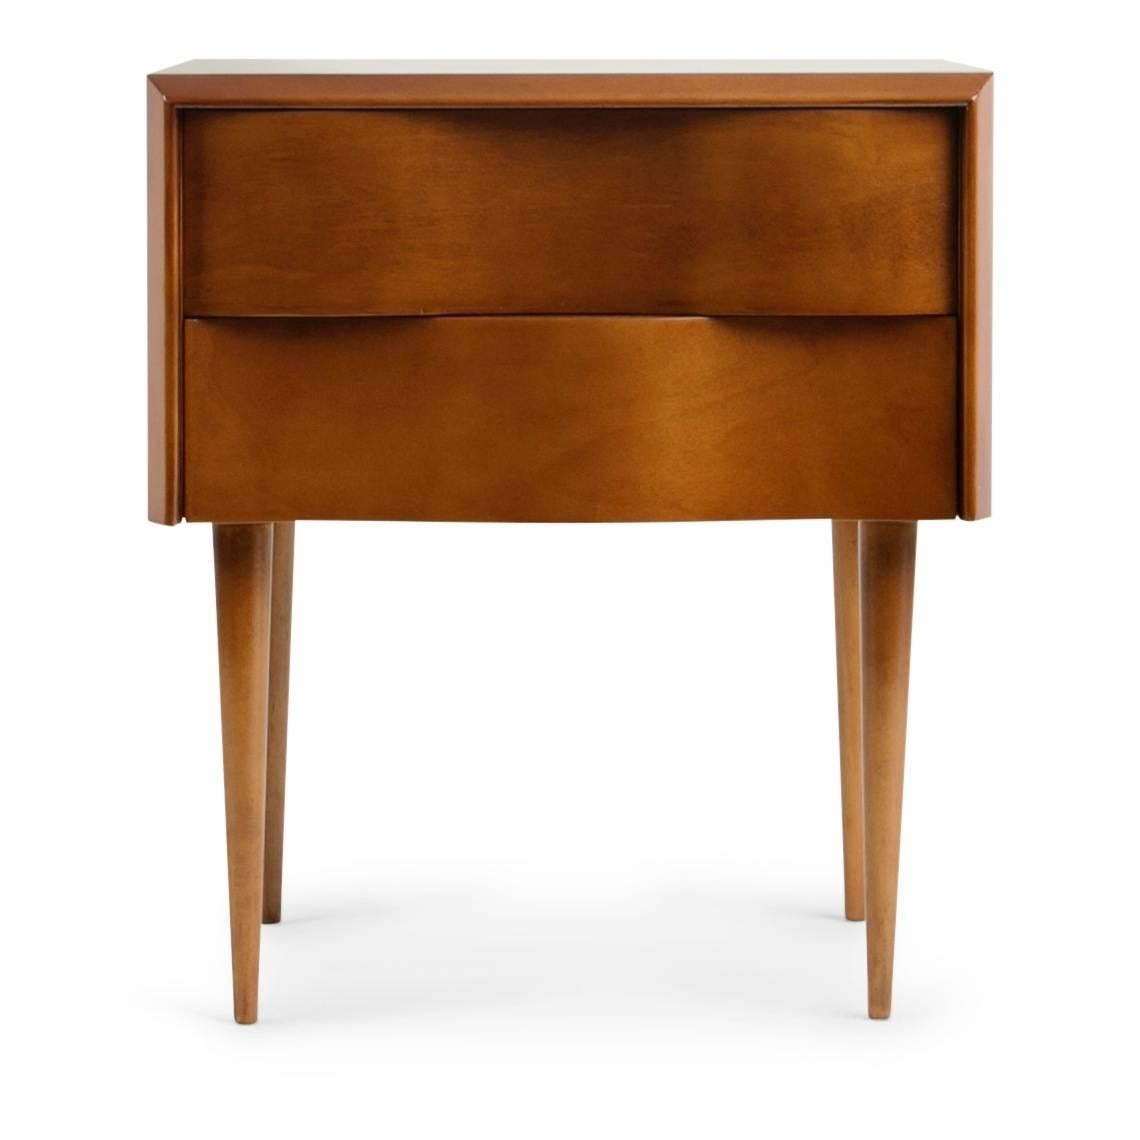 Swedish Edmond Spence Wave Front Nightstands, Stamped, circa 1950